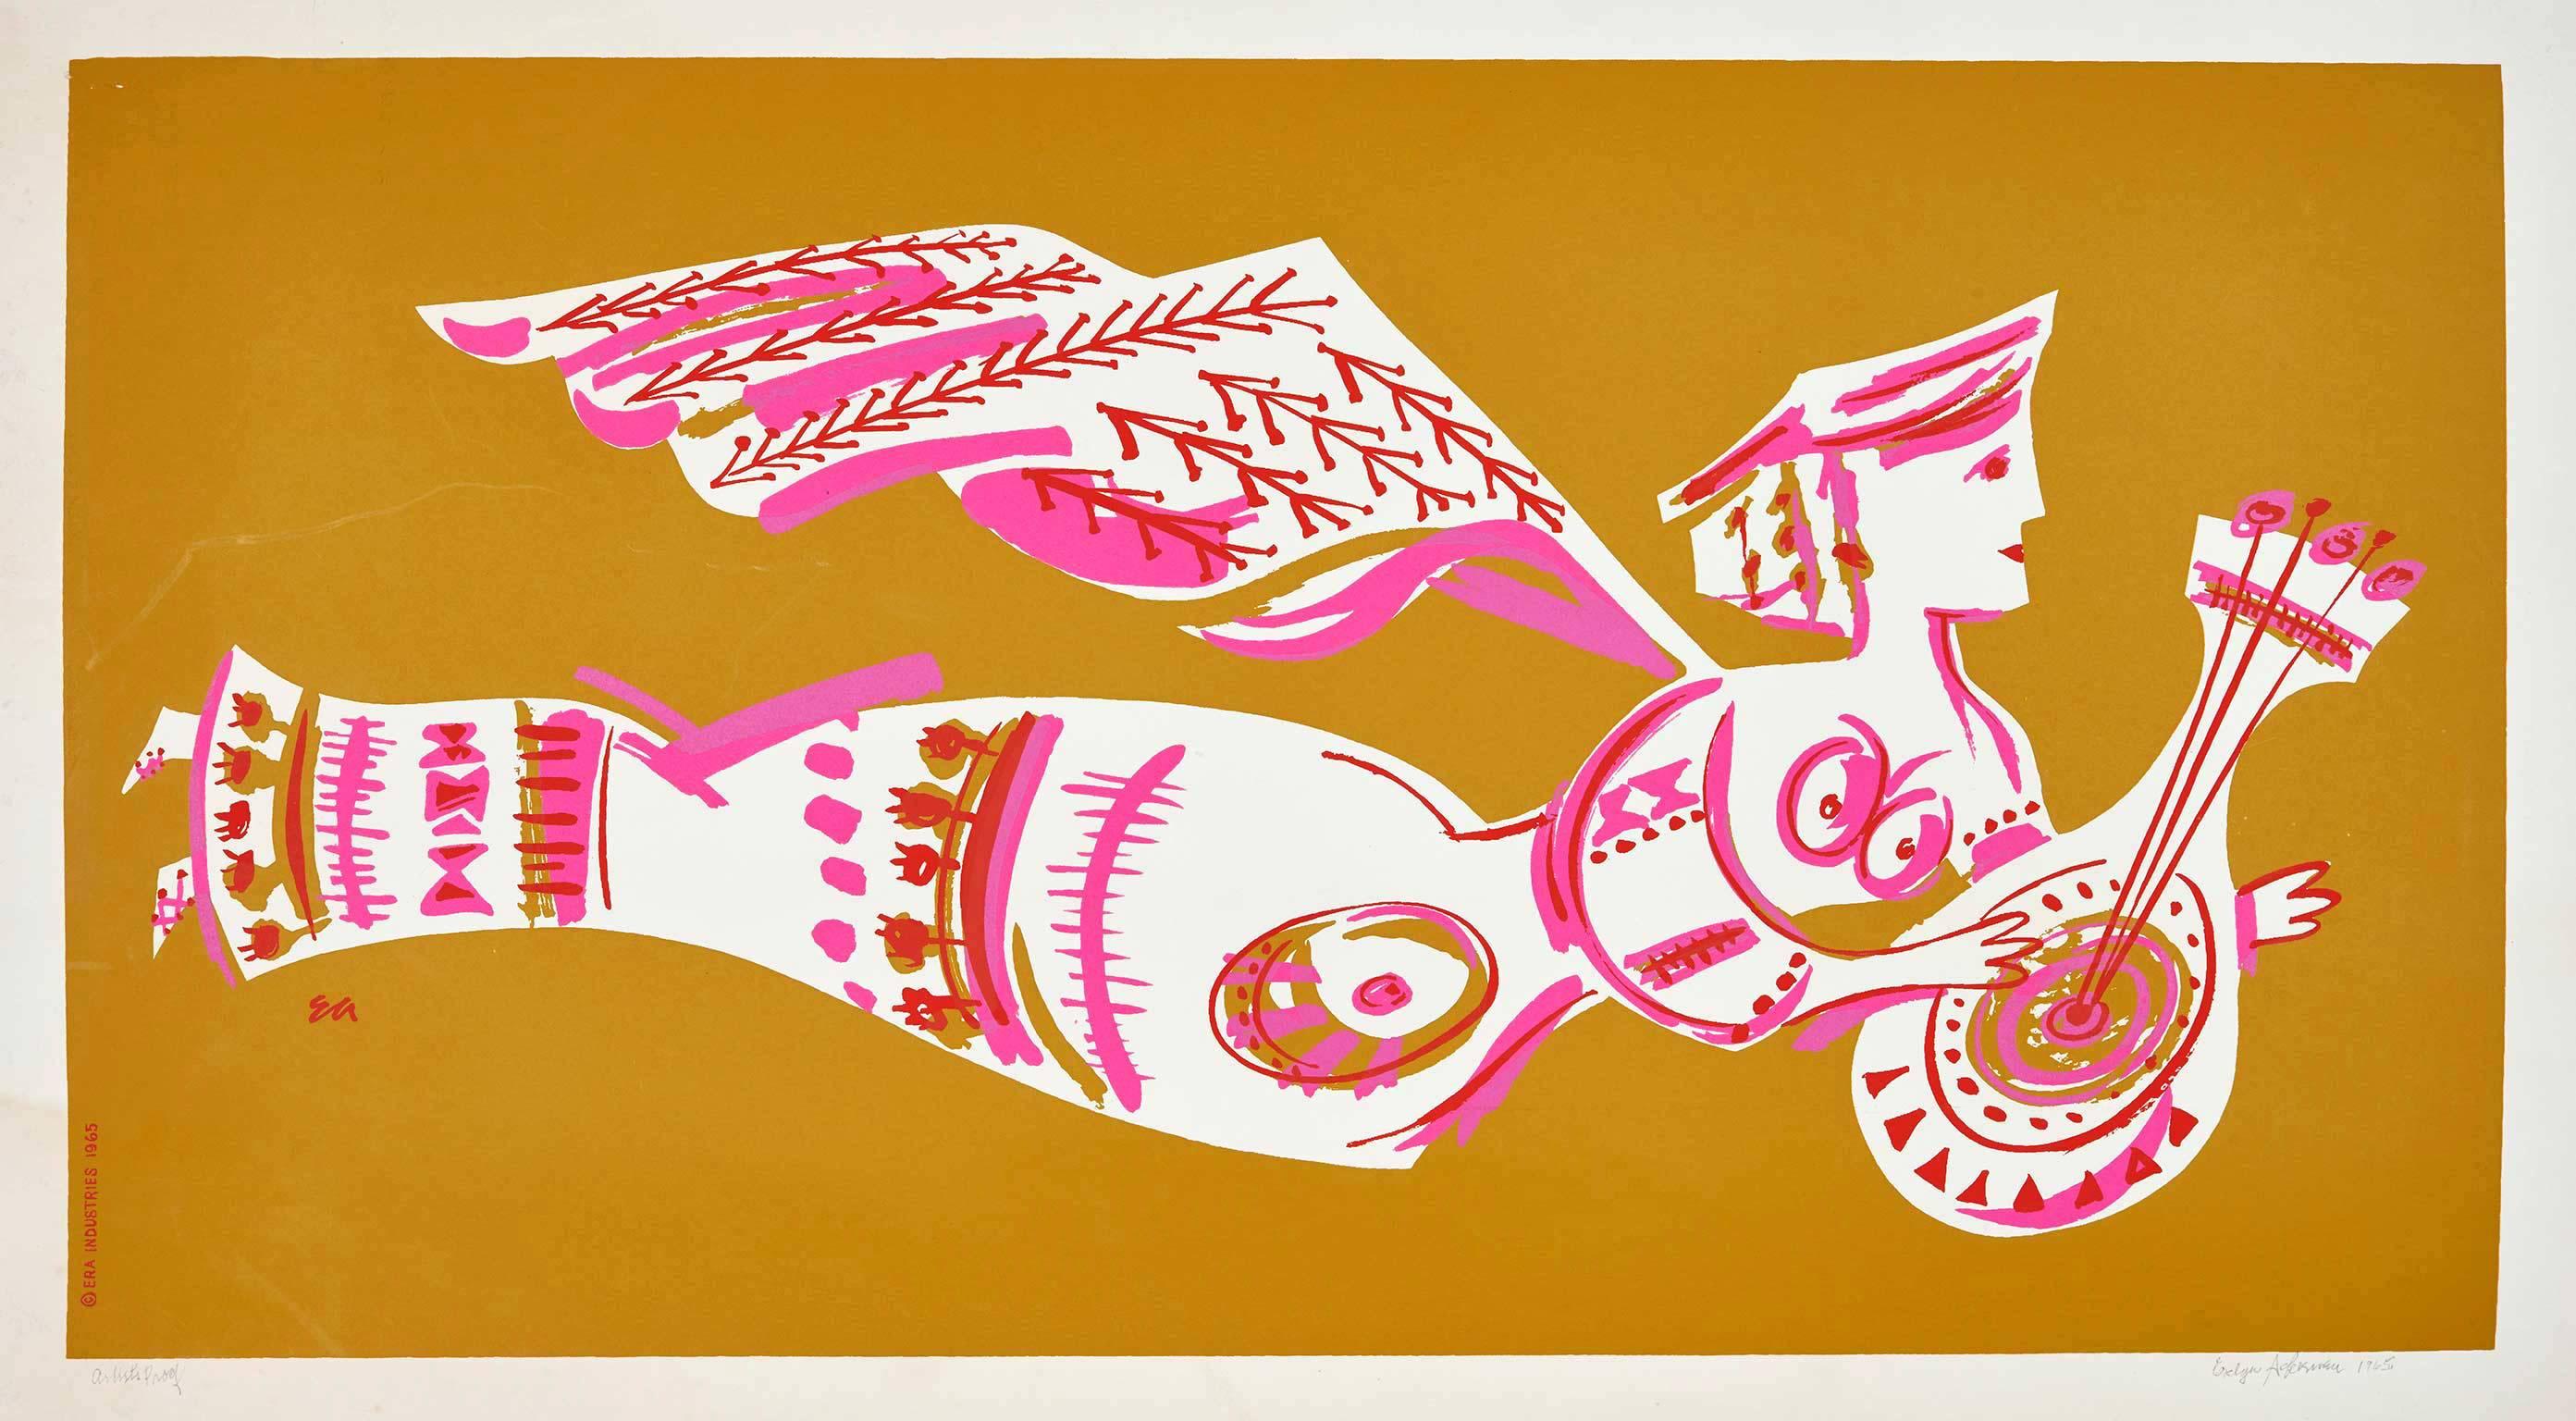 This extremely rare silkscreen print by Evelyn Ackerman dates from 1965 and is dated and signed by the beloved artist. Evelyn Ackerman and her husband Jerry were important exponents of the post-war Southern California design scene. Evelyn's work was